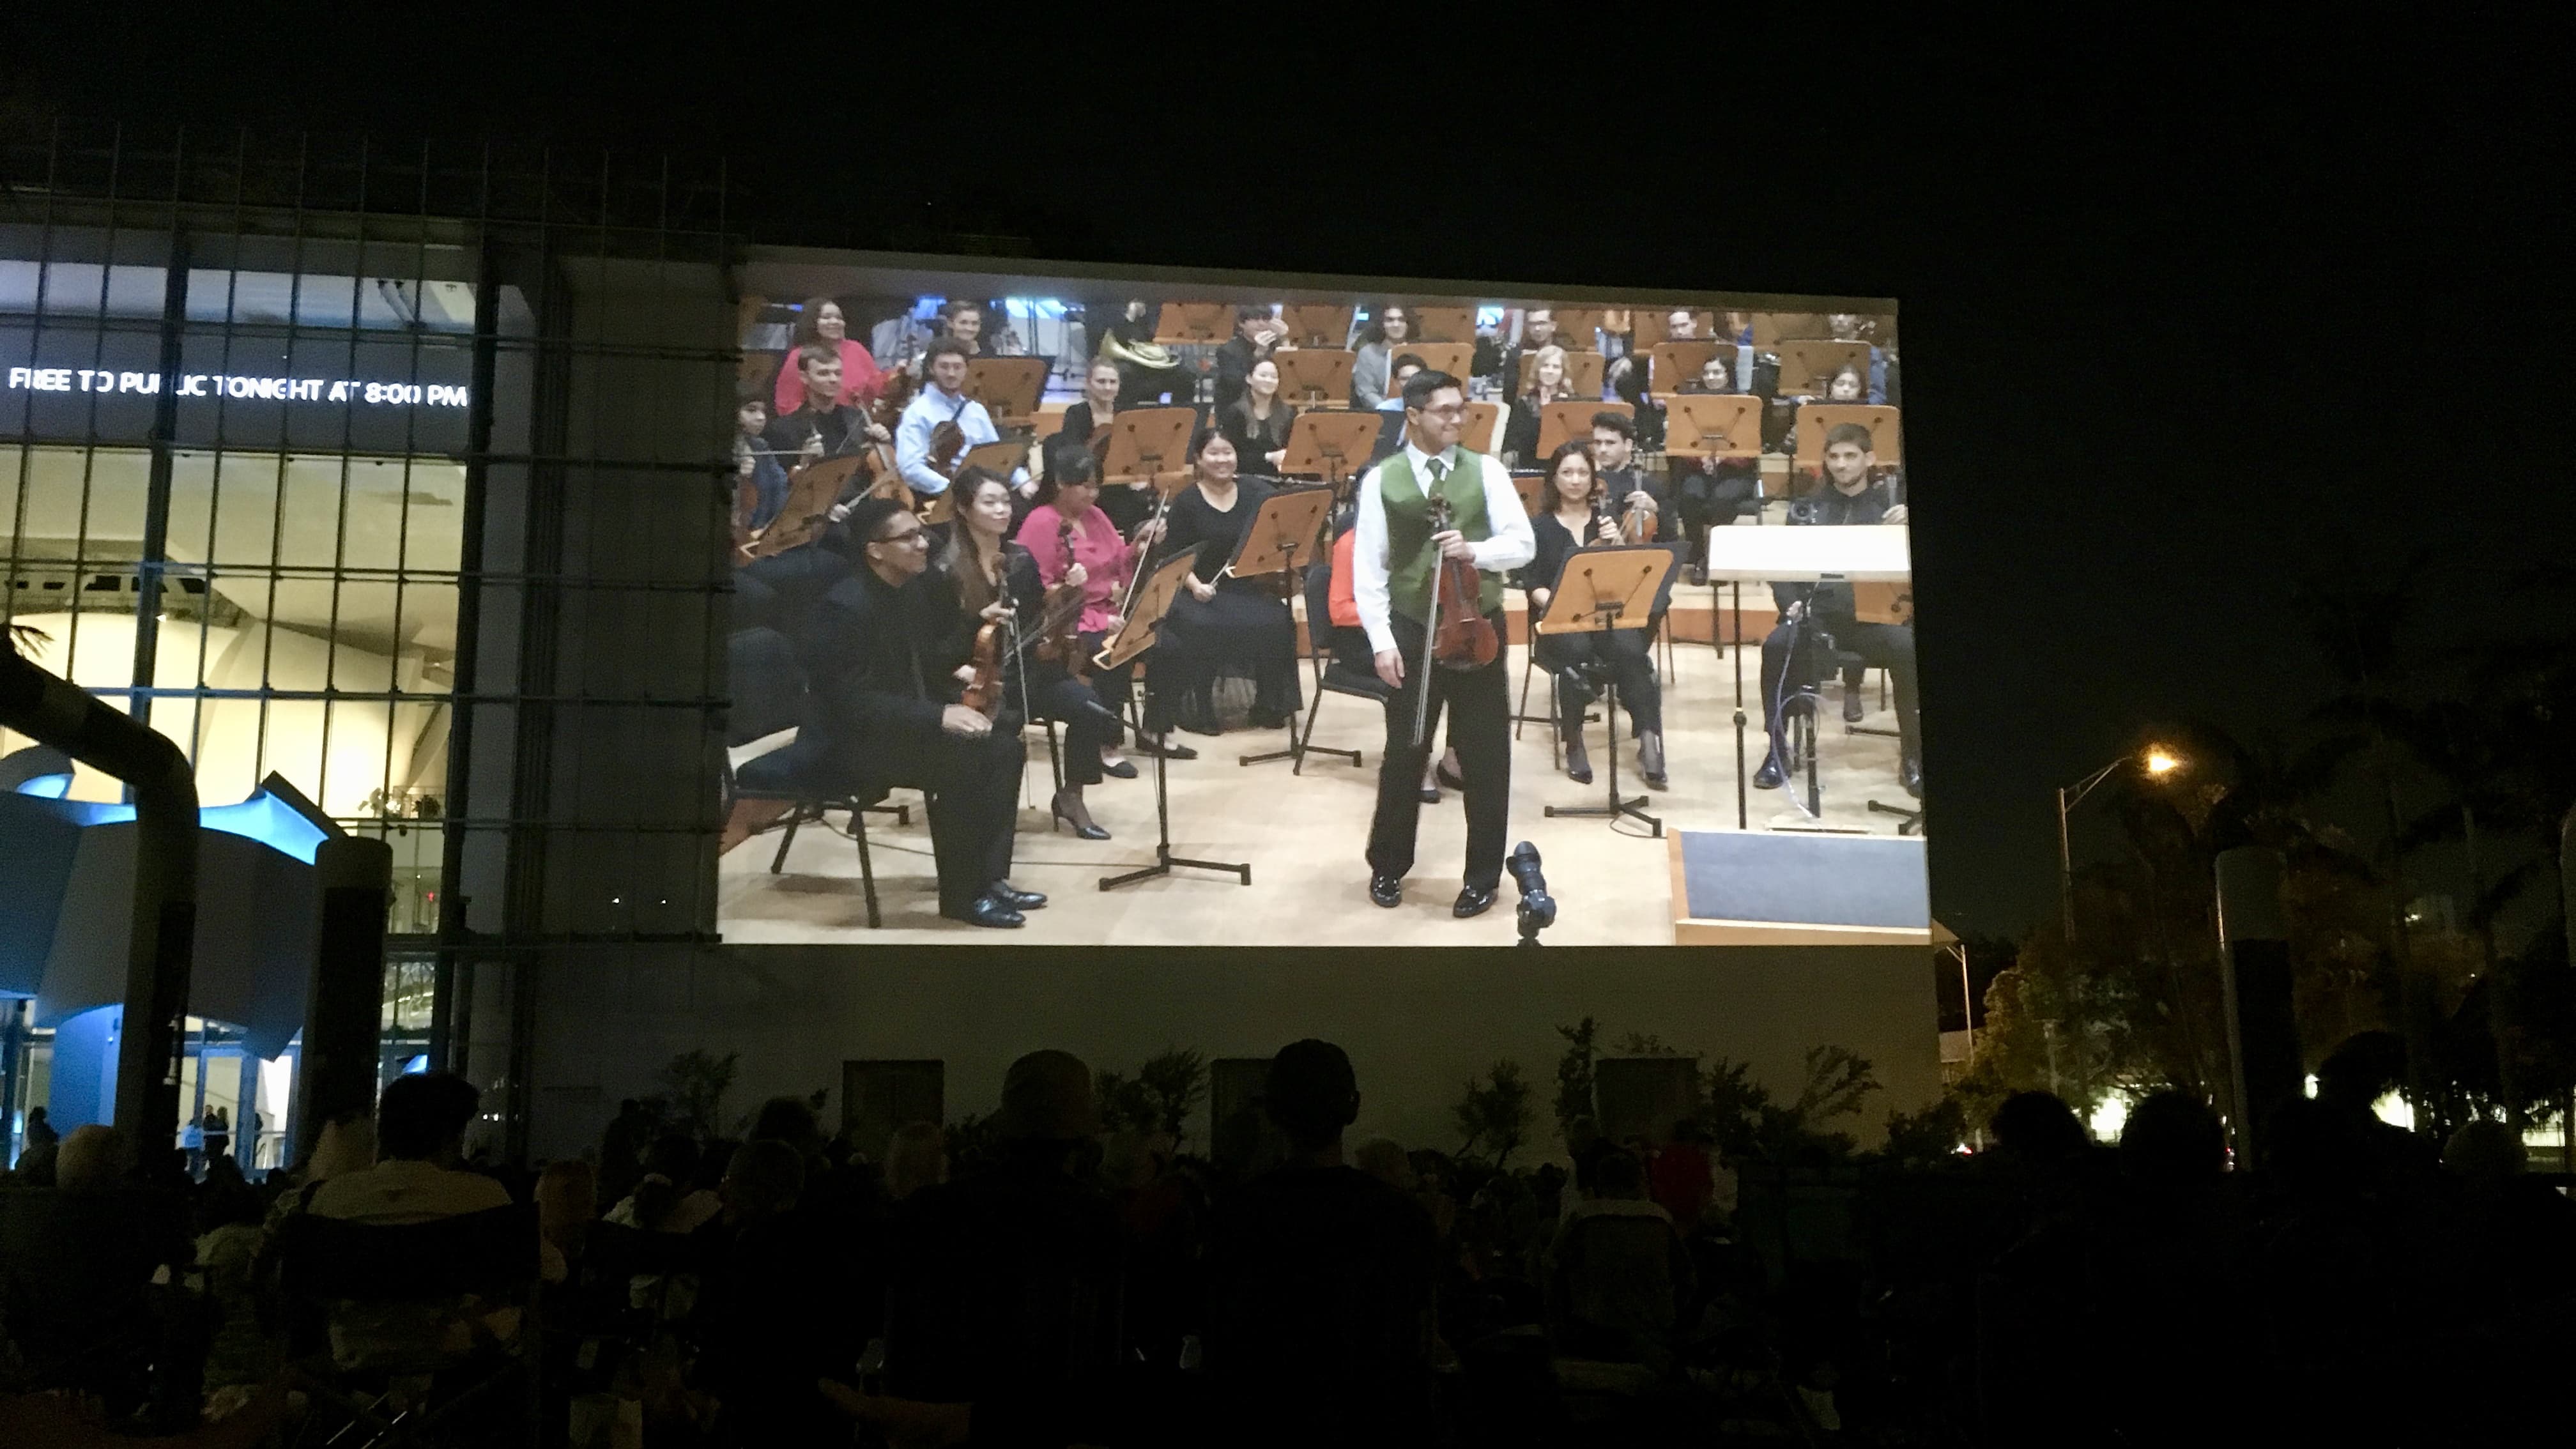 Violinist Matthew Hakkarainen performs with the New World Symphony, as seen on the outdoor Wallcast.